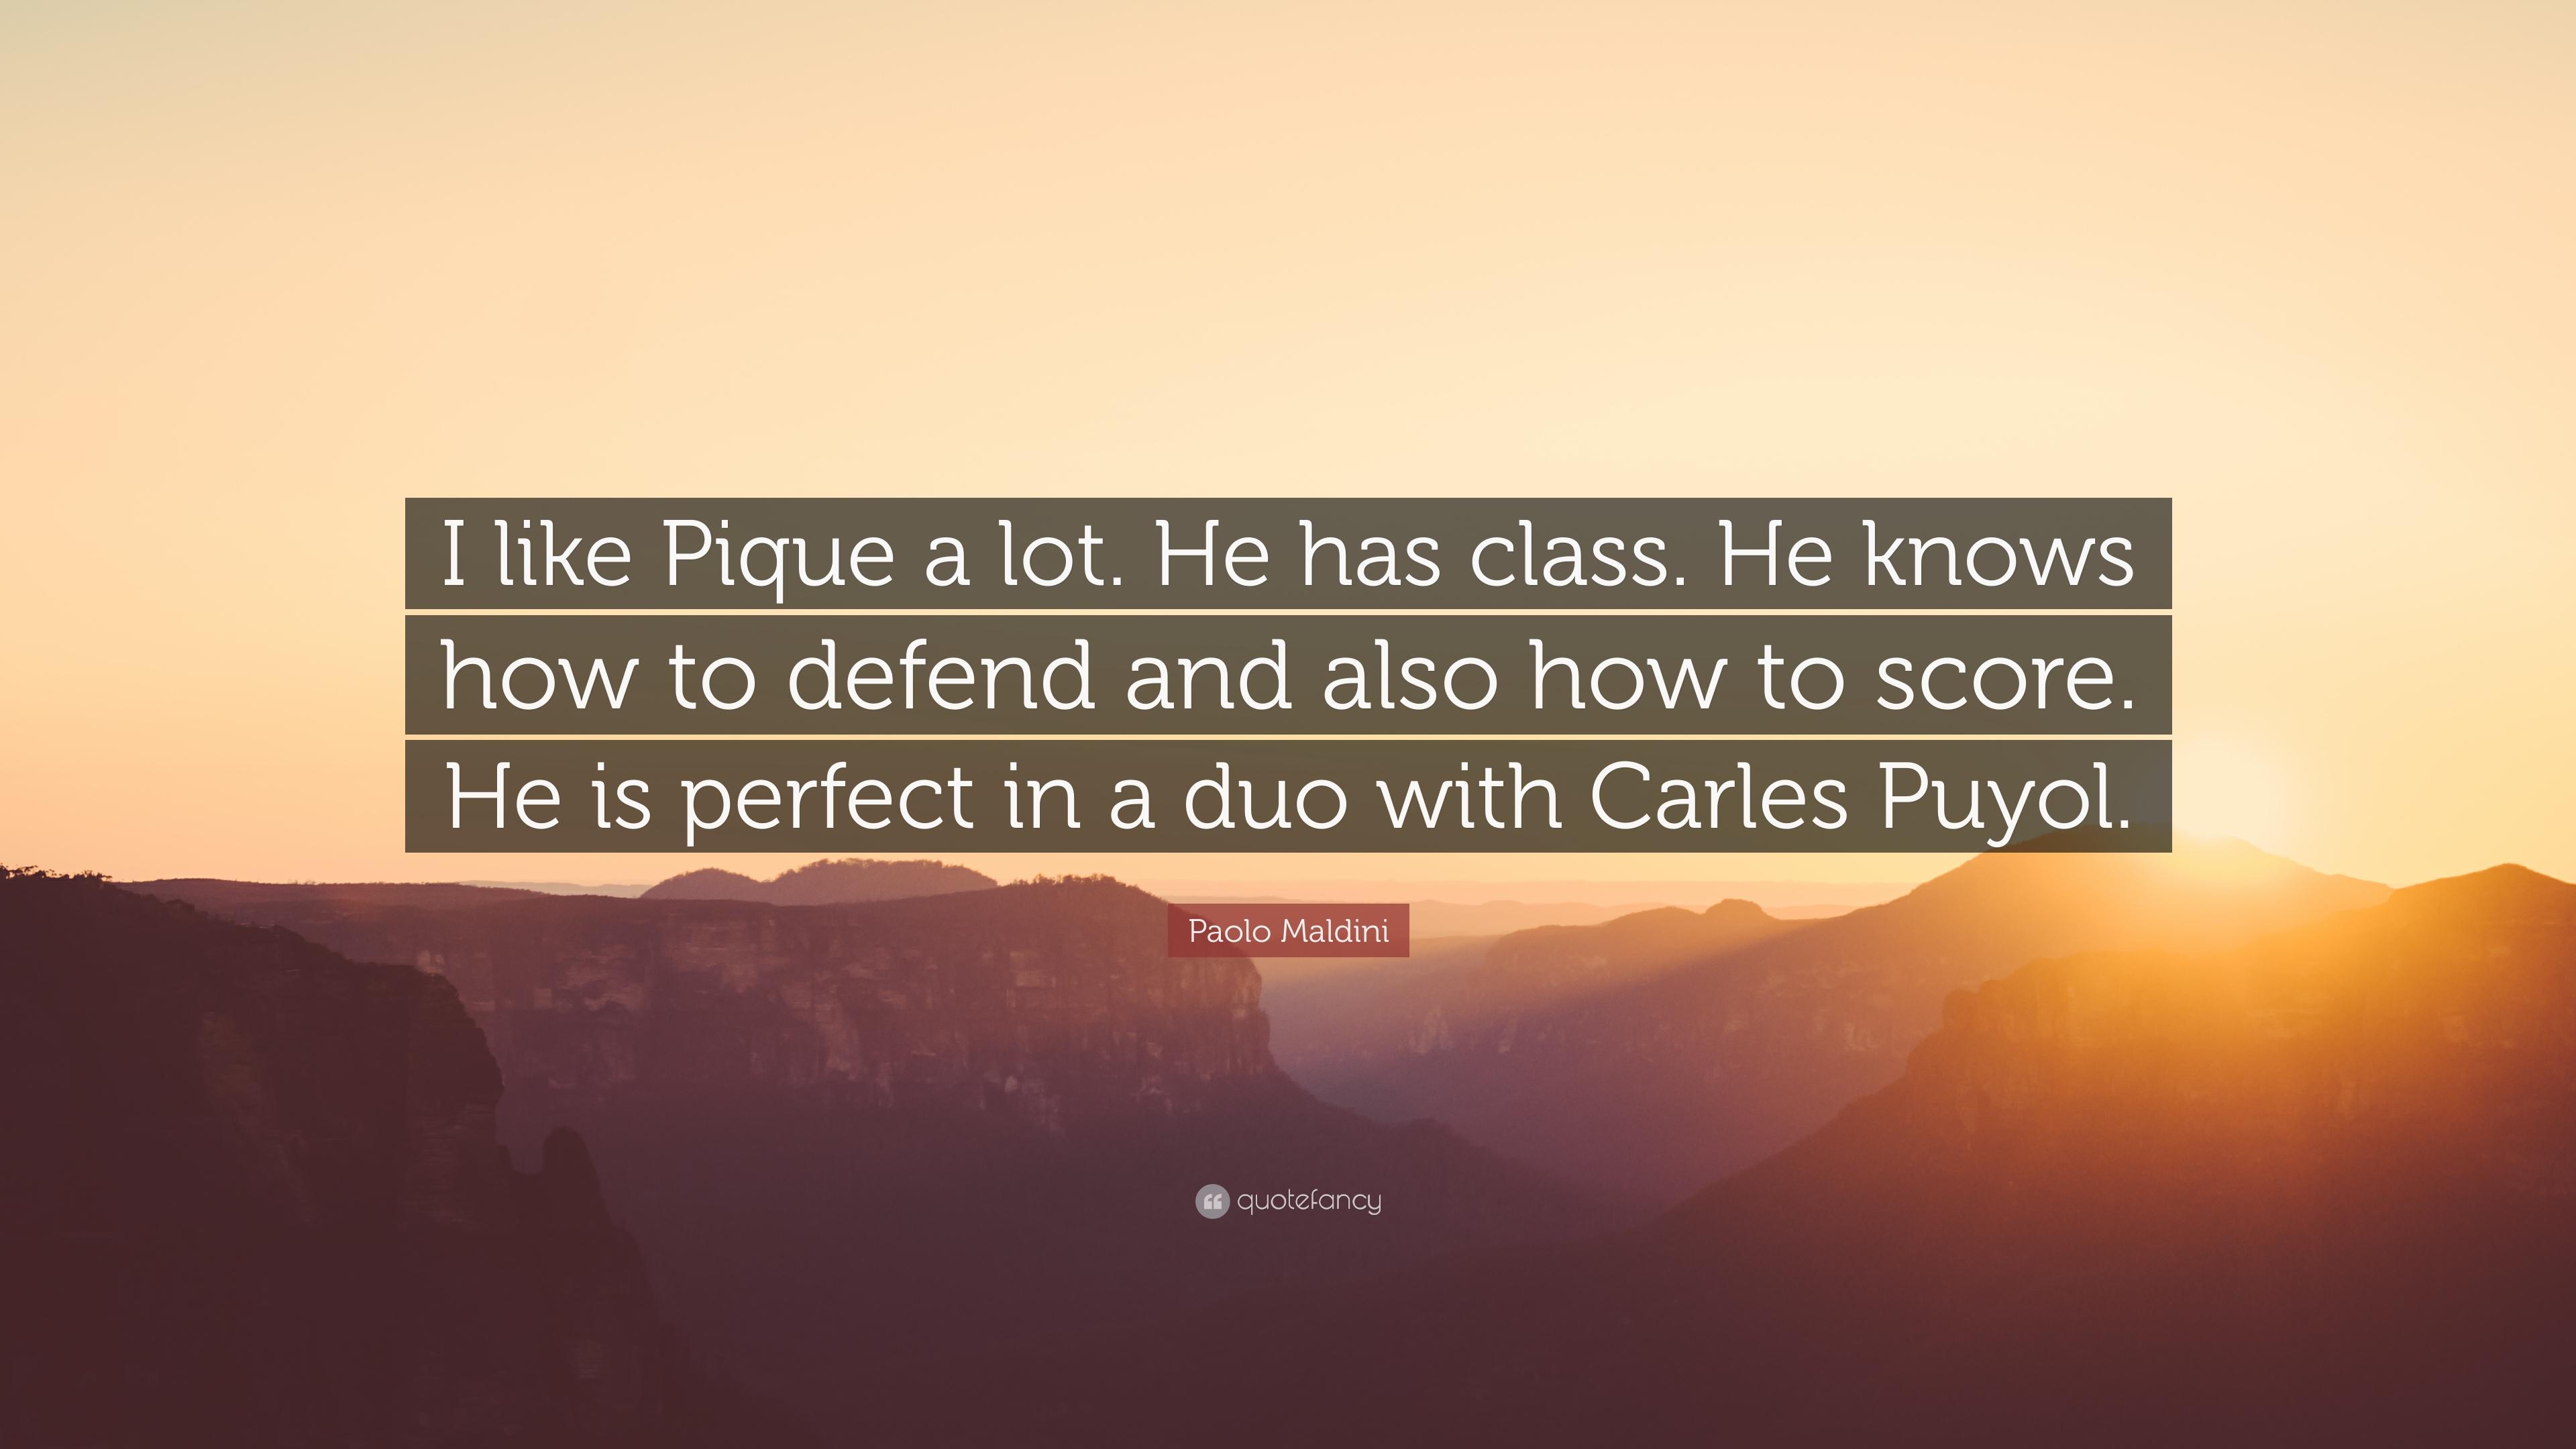 Paolo Maldini Quote: “I like Pique a lot. He has class. He knows how